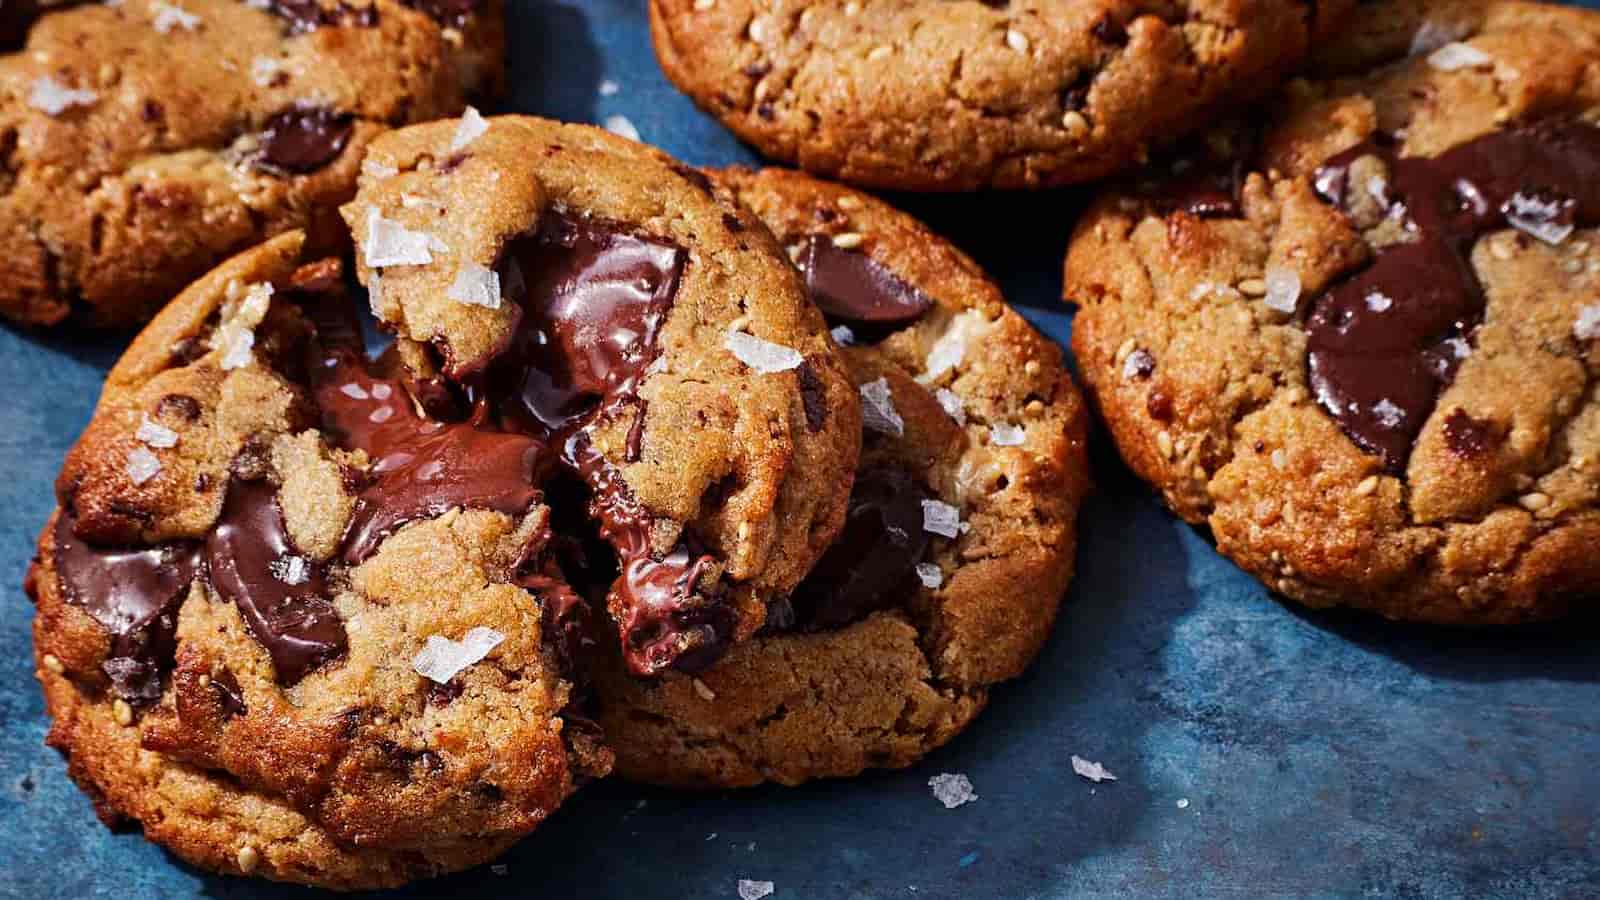 Bake Cookies Day 2023: Date, History and Five tasty facts about cookies